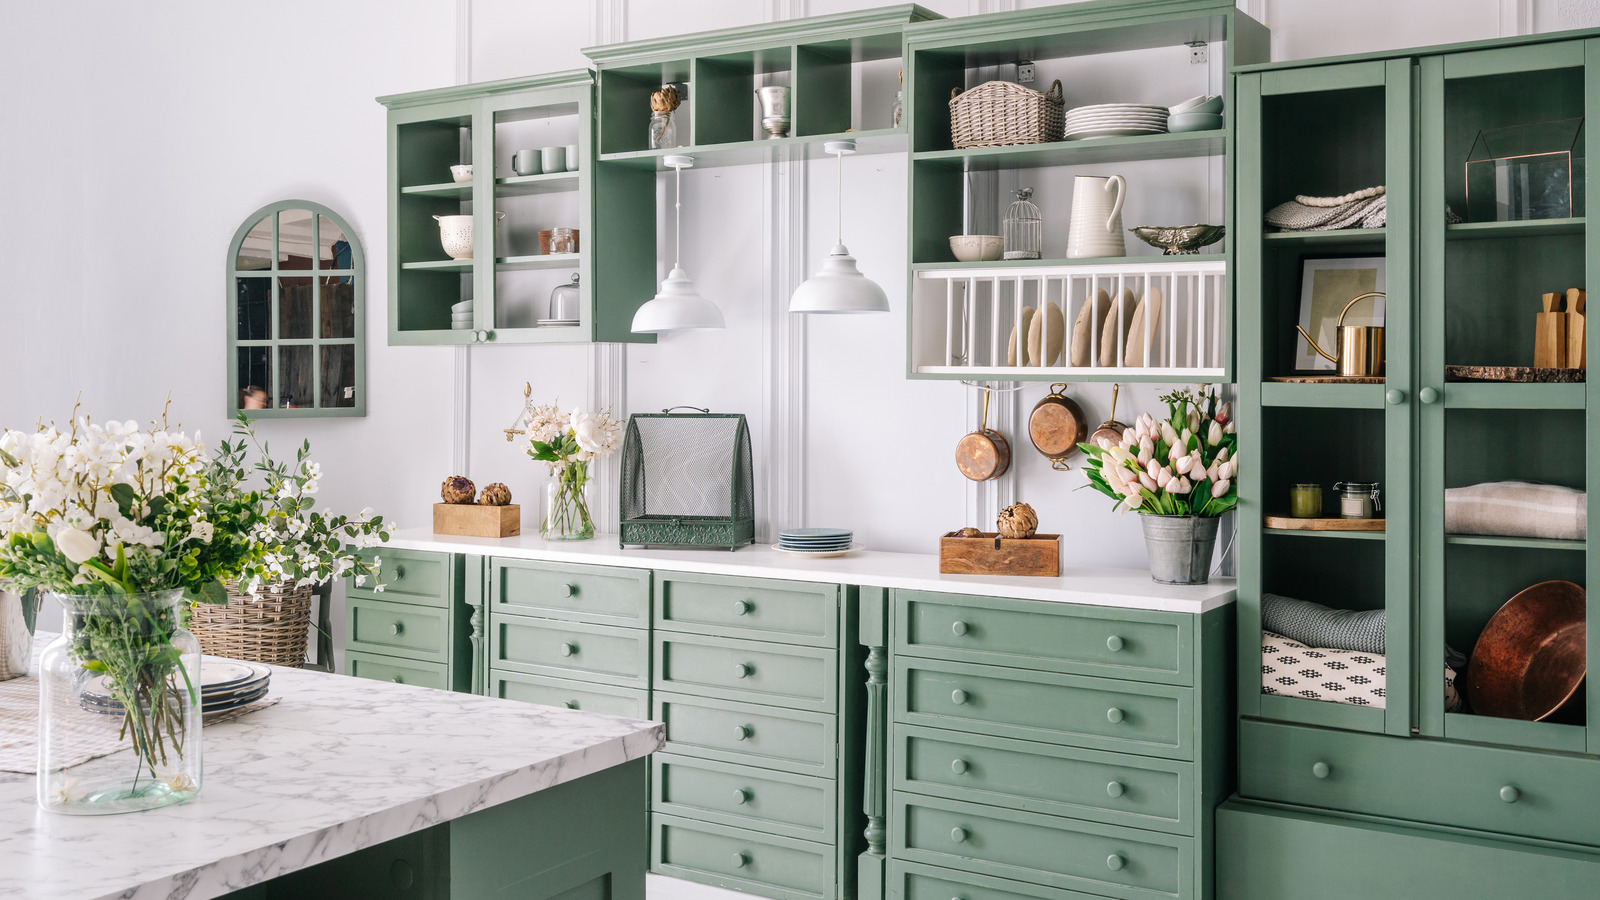 5 Tips For Choosing The Right Kitchen Cabinet Style For Your Space